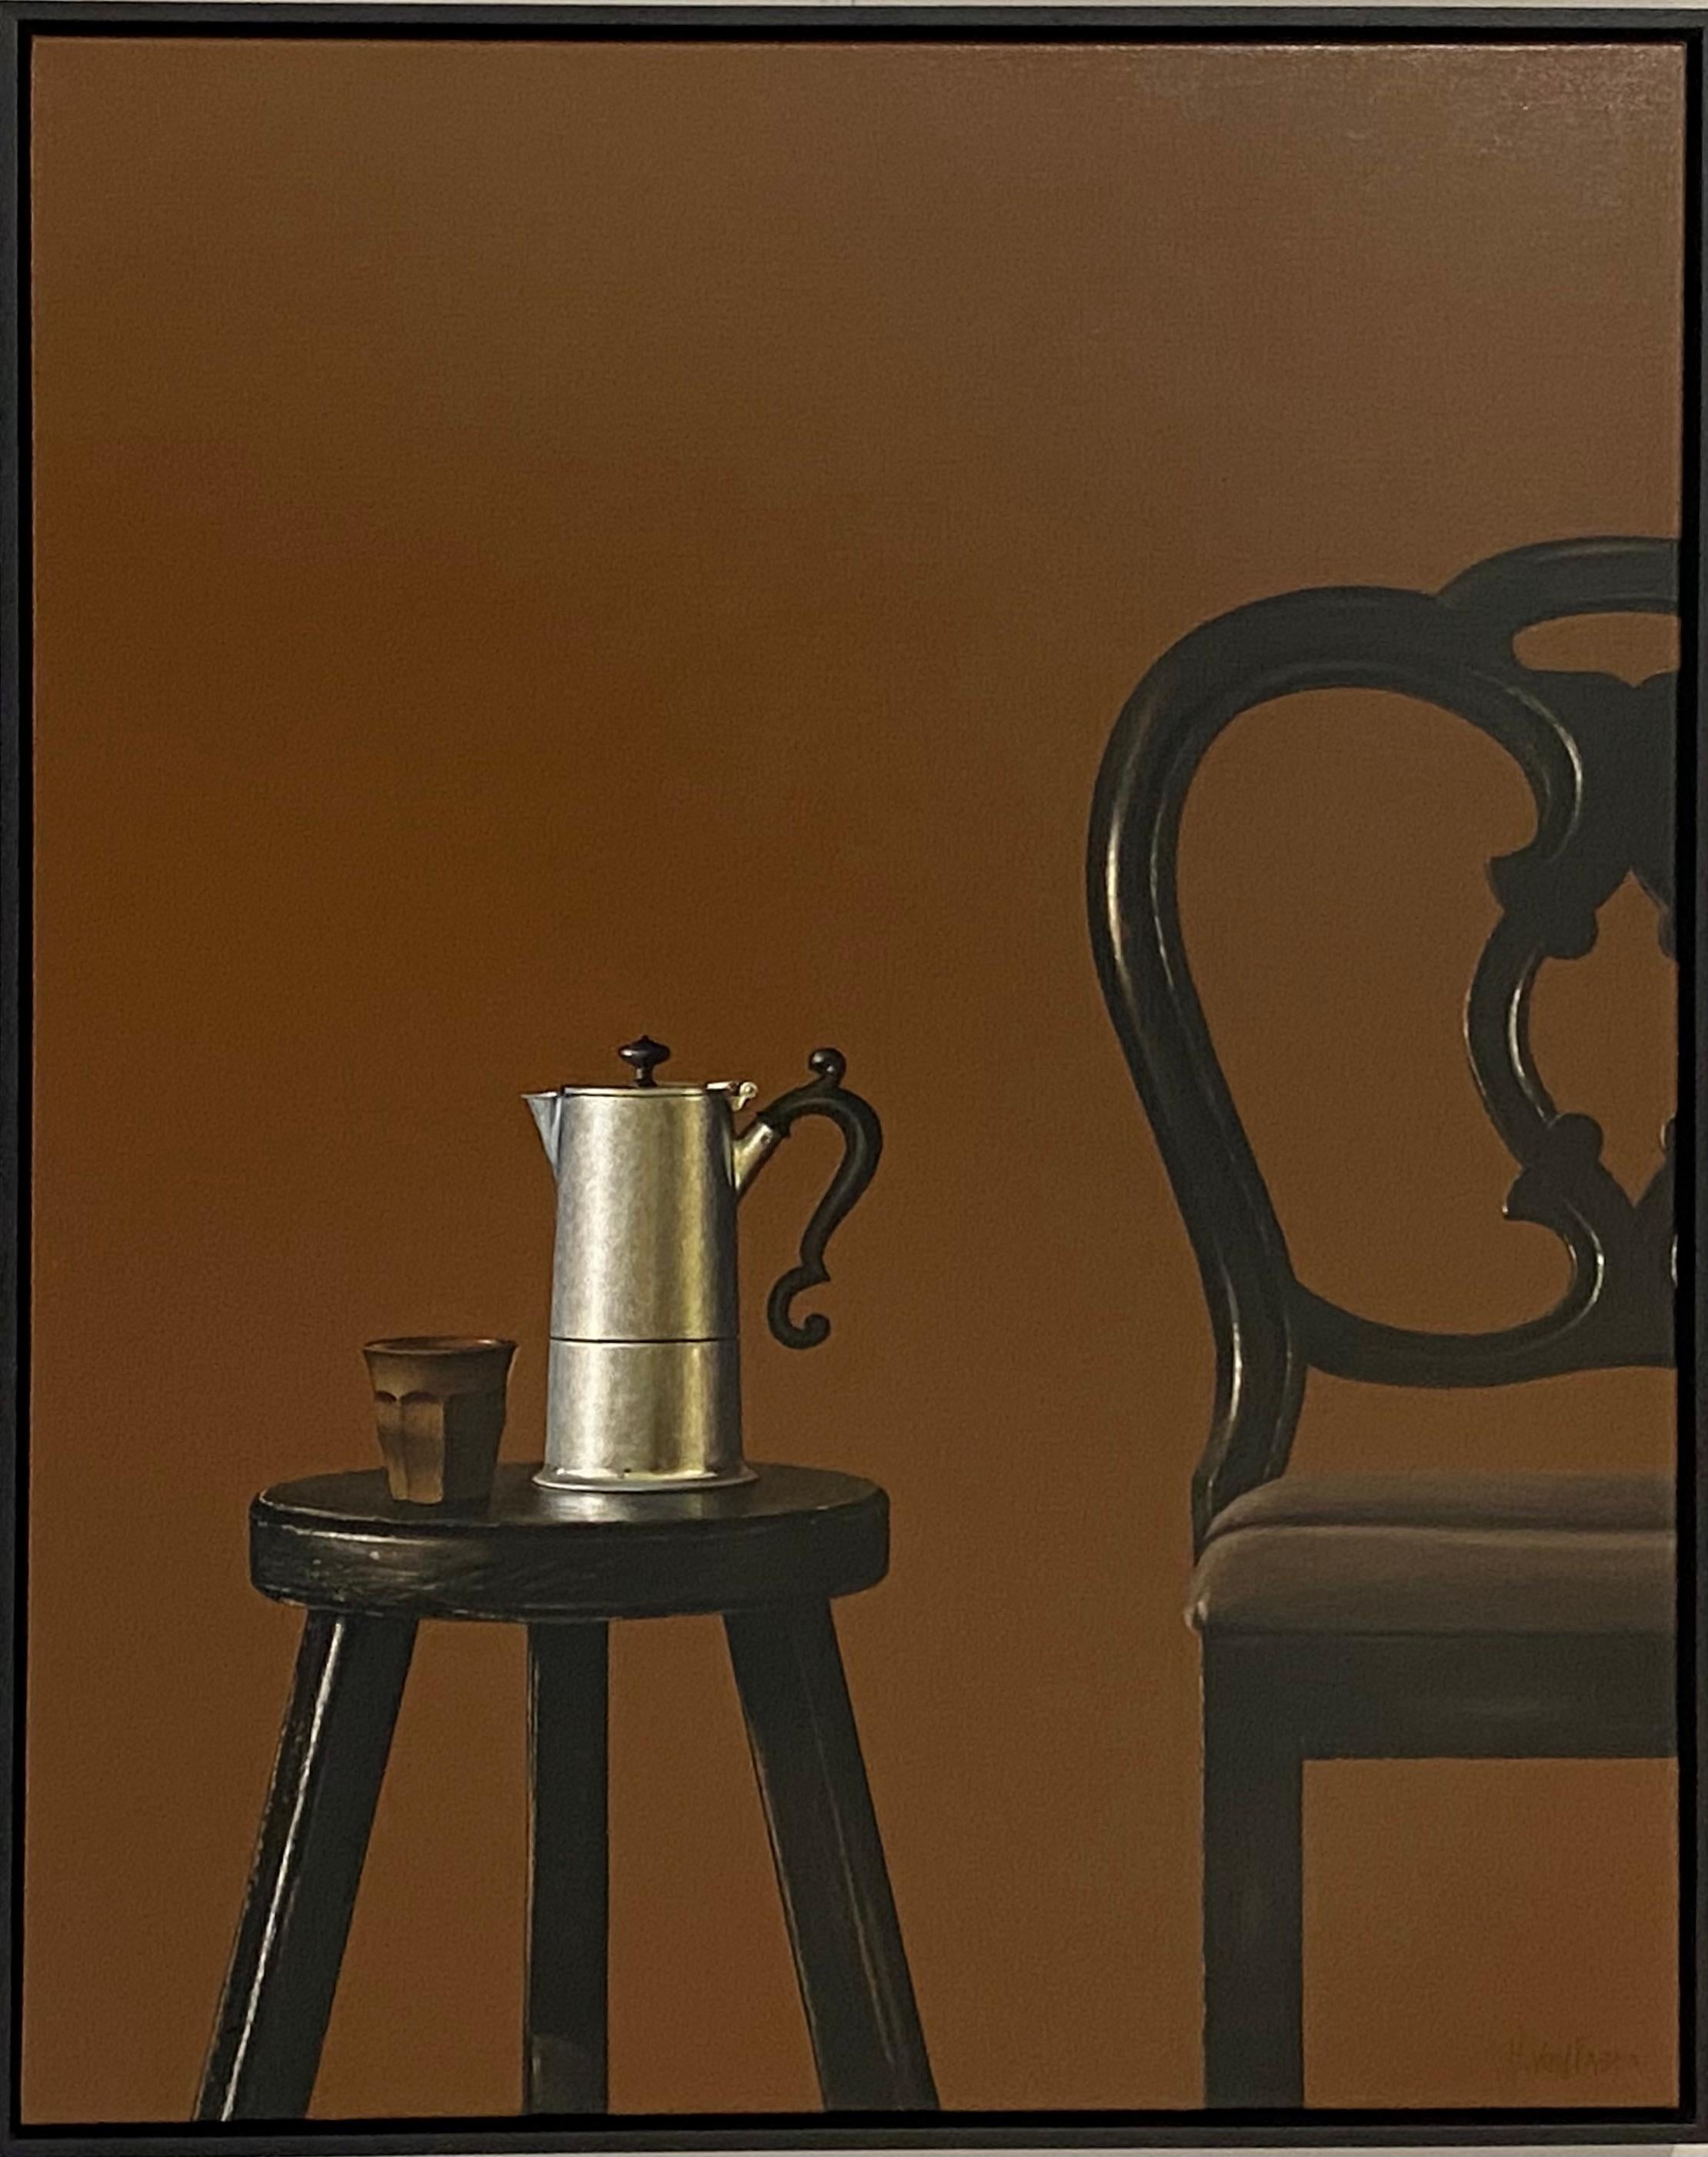 Chair with Percolator-21st Contemporary Dutch Still-life painting with Furniture - Brown Still-Life Painting by Heidi von Faber